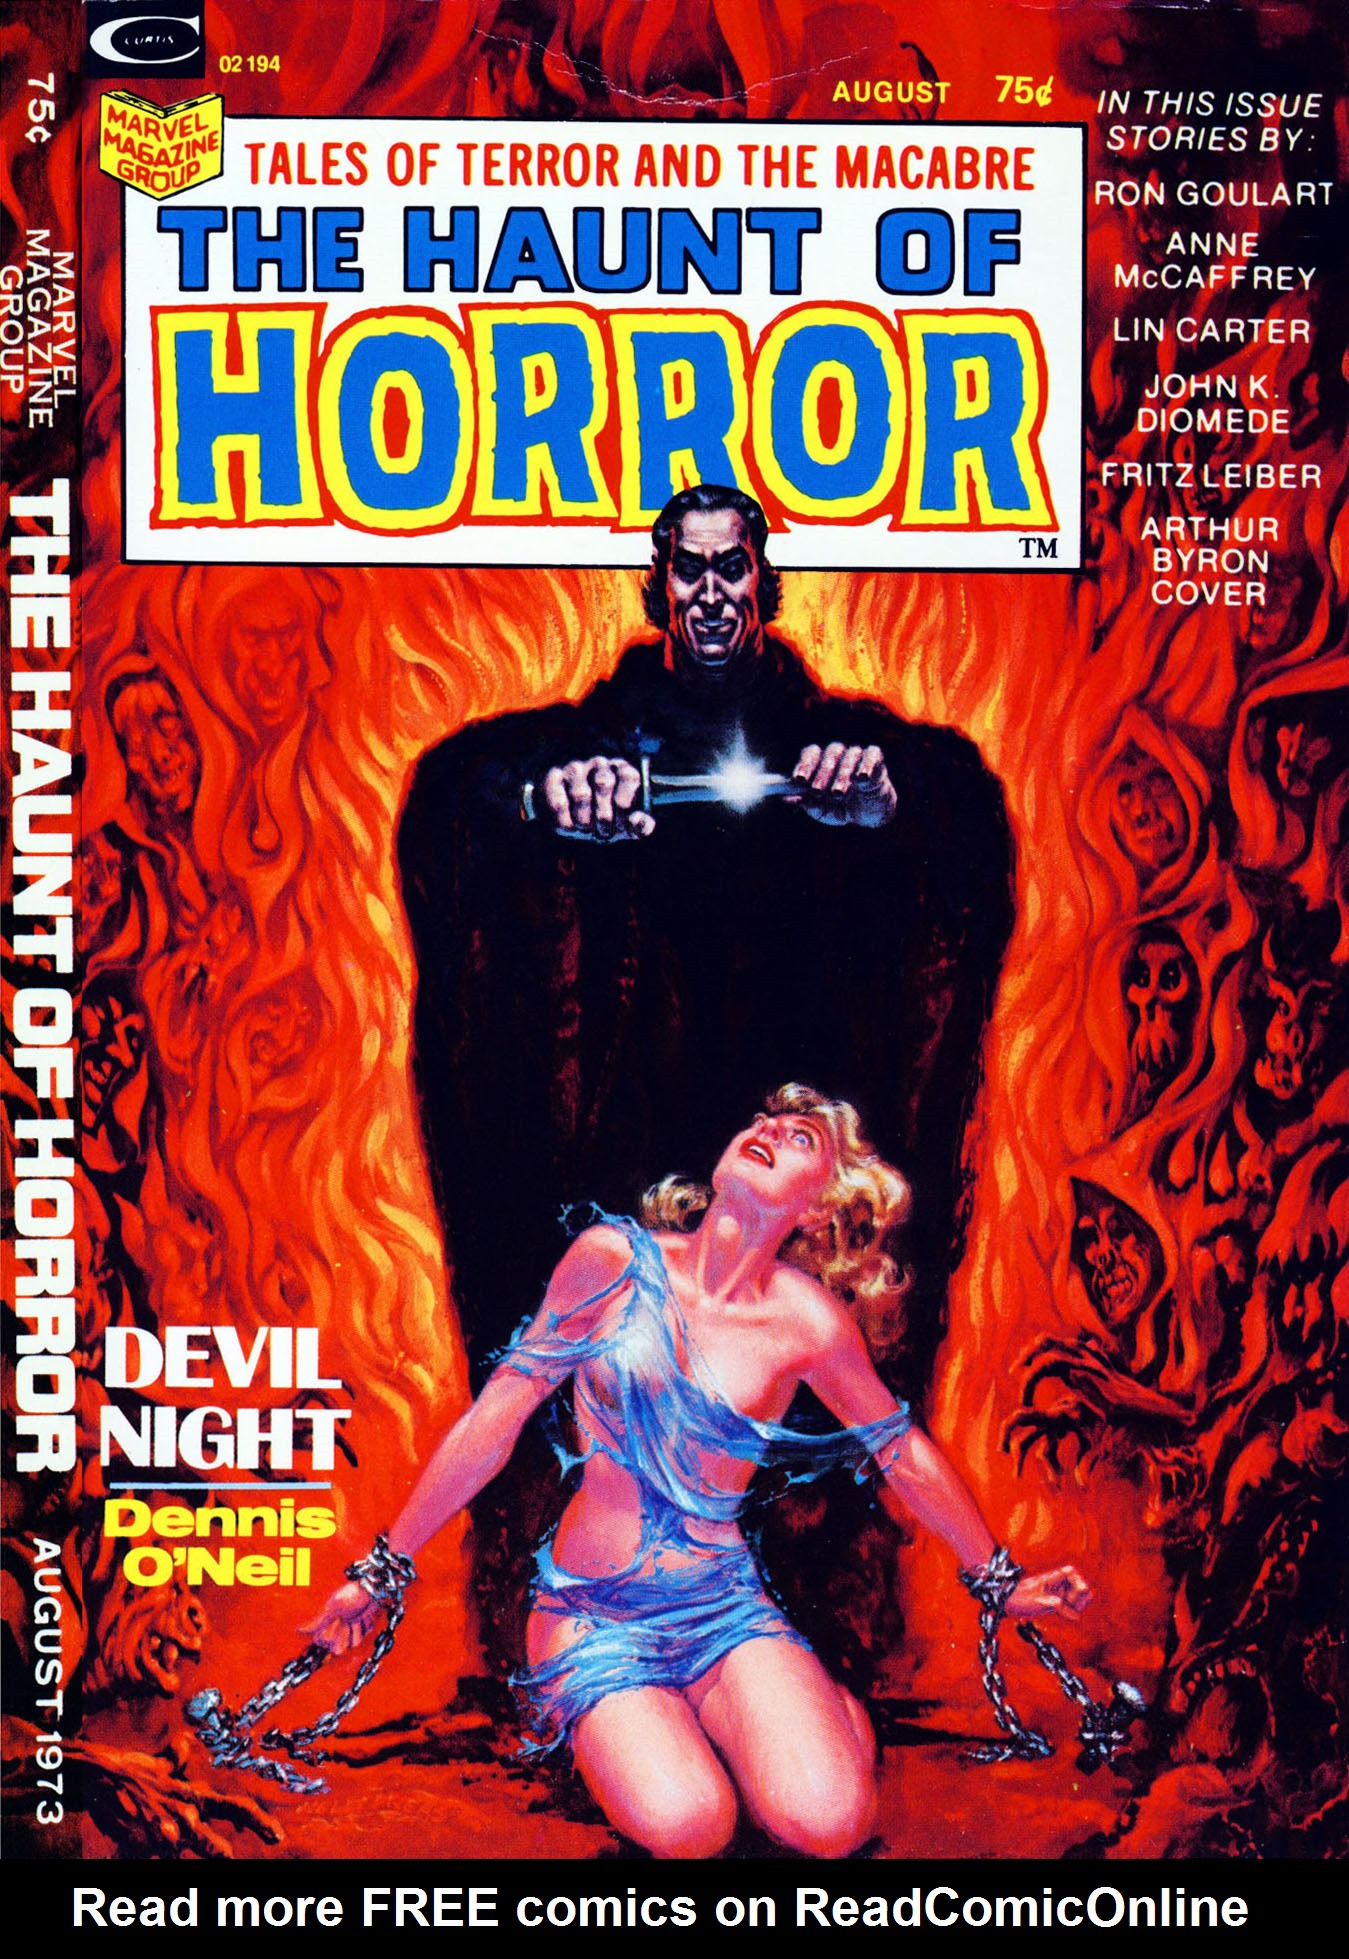 Read online The Haunt of Horror comic -  Issue # TPB 2 - 1